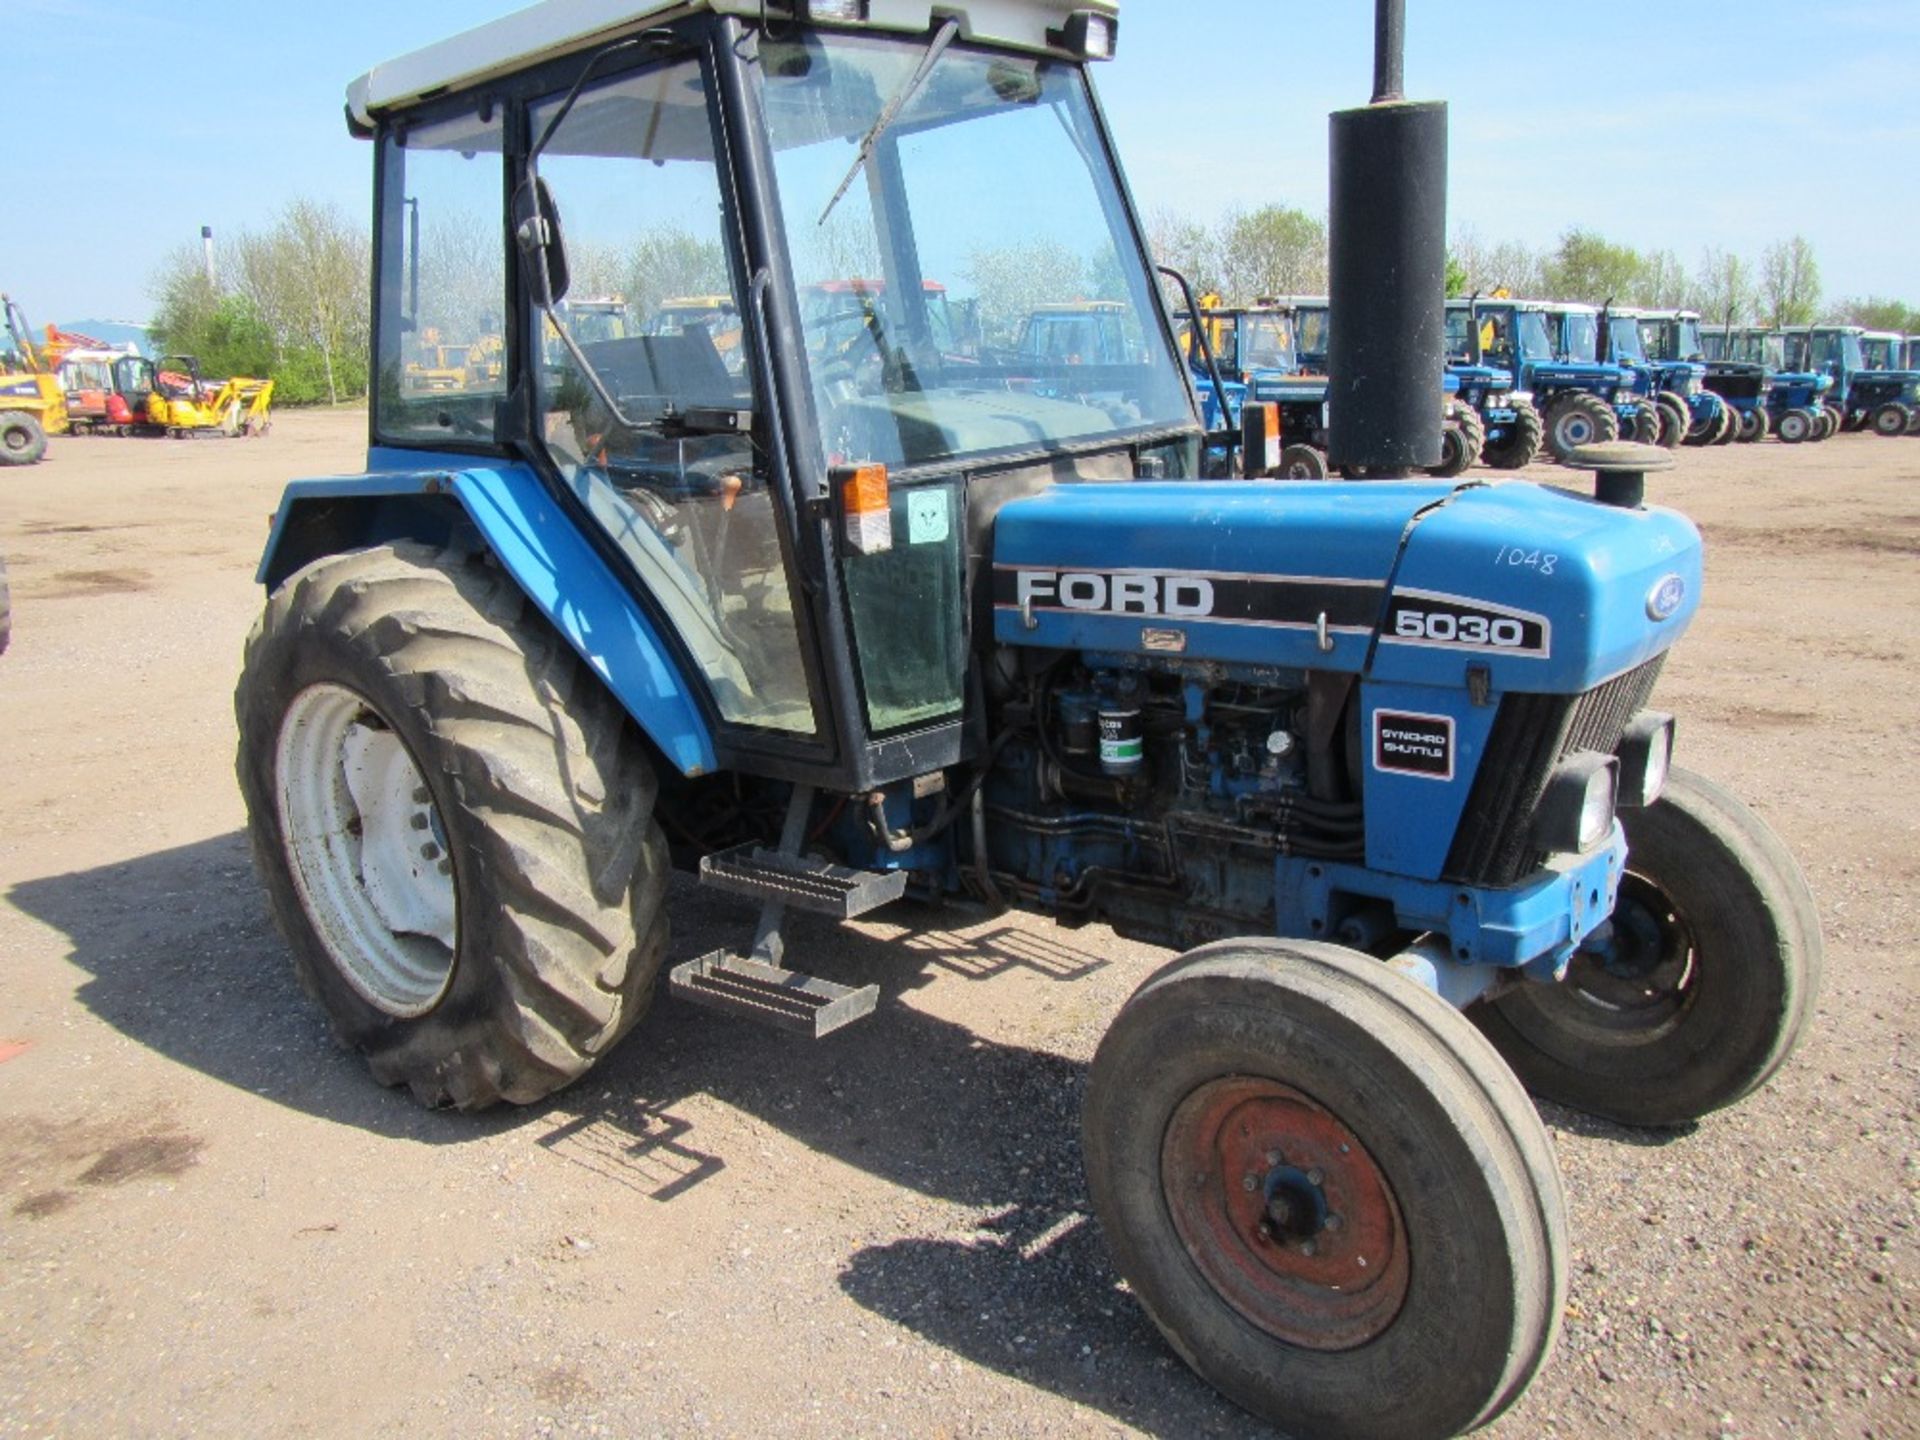 Ford 5030 Tractor with New Clutch Fitted & 3 Point Linkage Auto Hitch Reg. No. M955 BNH Ser. No. - Image 3 of 17